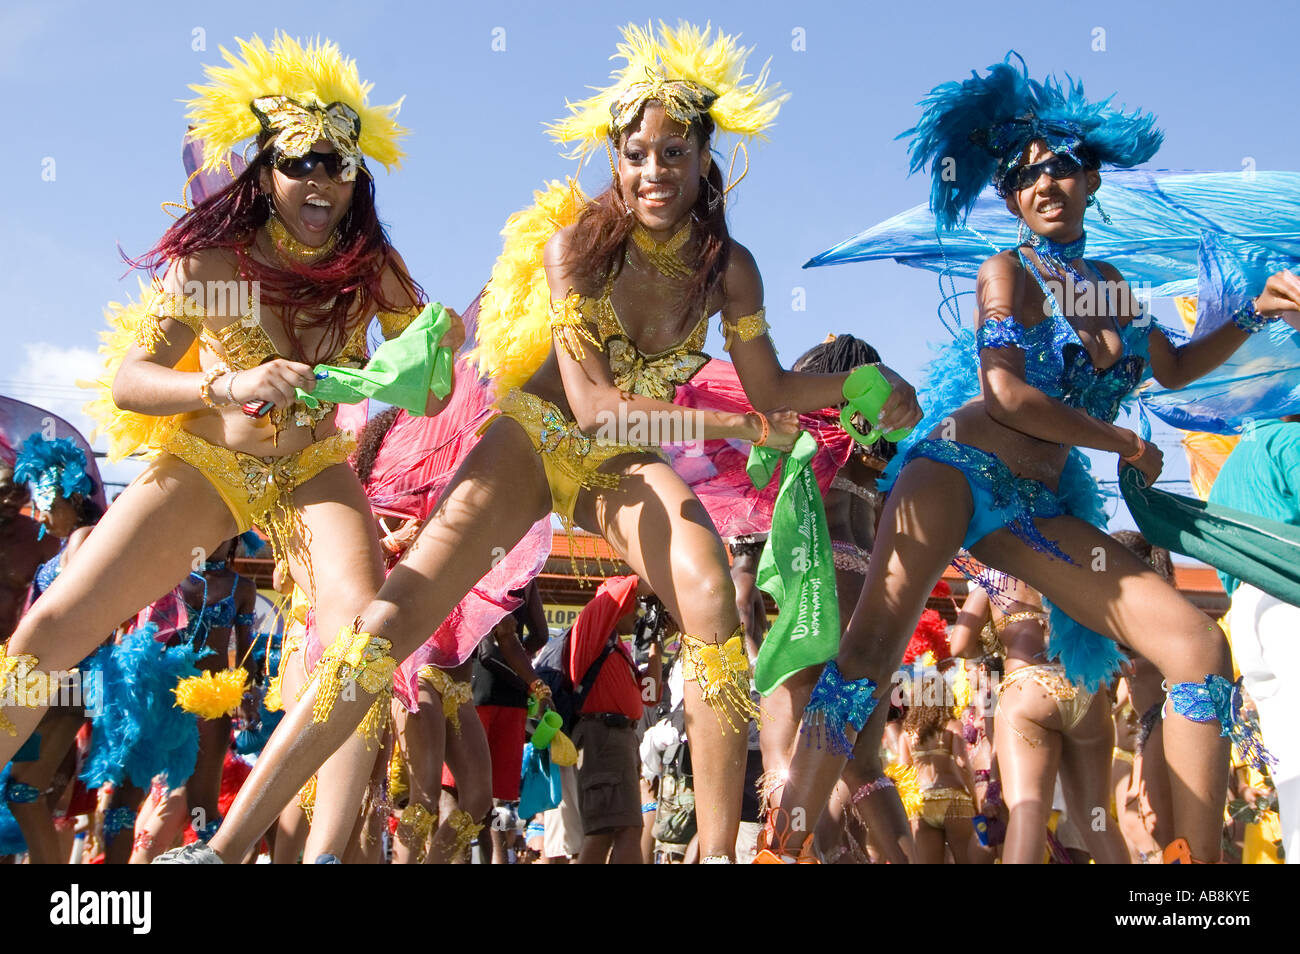 West Indies Port of Spain Trinidad Carnival Female dancers celebrating on mainstage in colorful costumes. Stock Photo